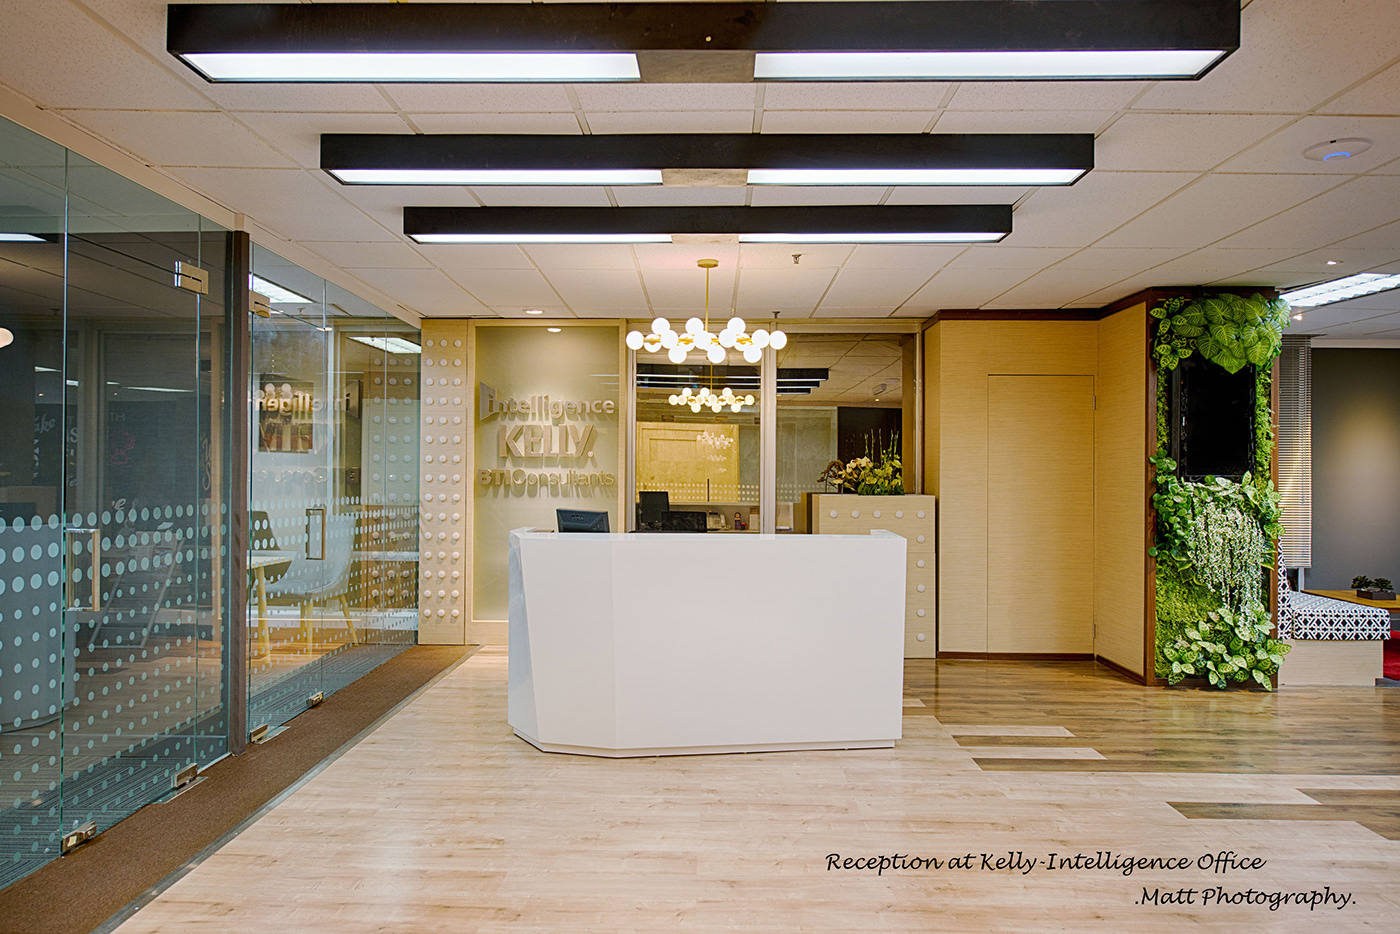 fit out indonesia Interior IWA Design Kelly Intelligence Office recruitment renovation